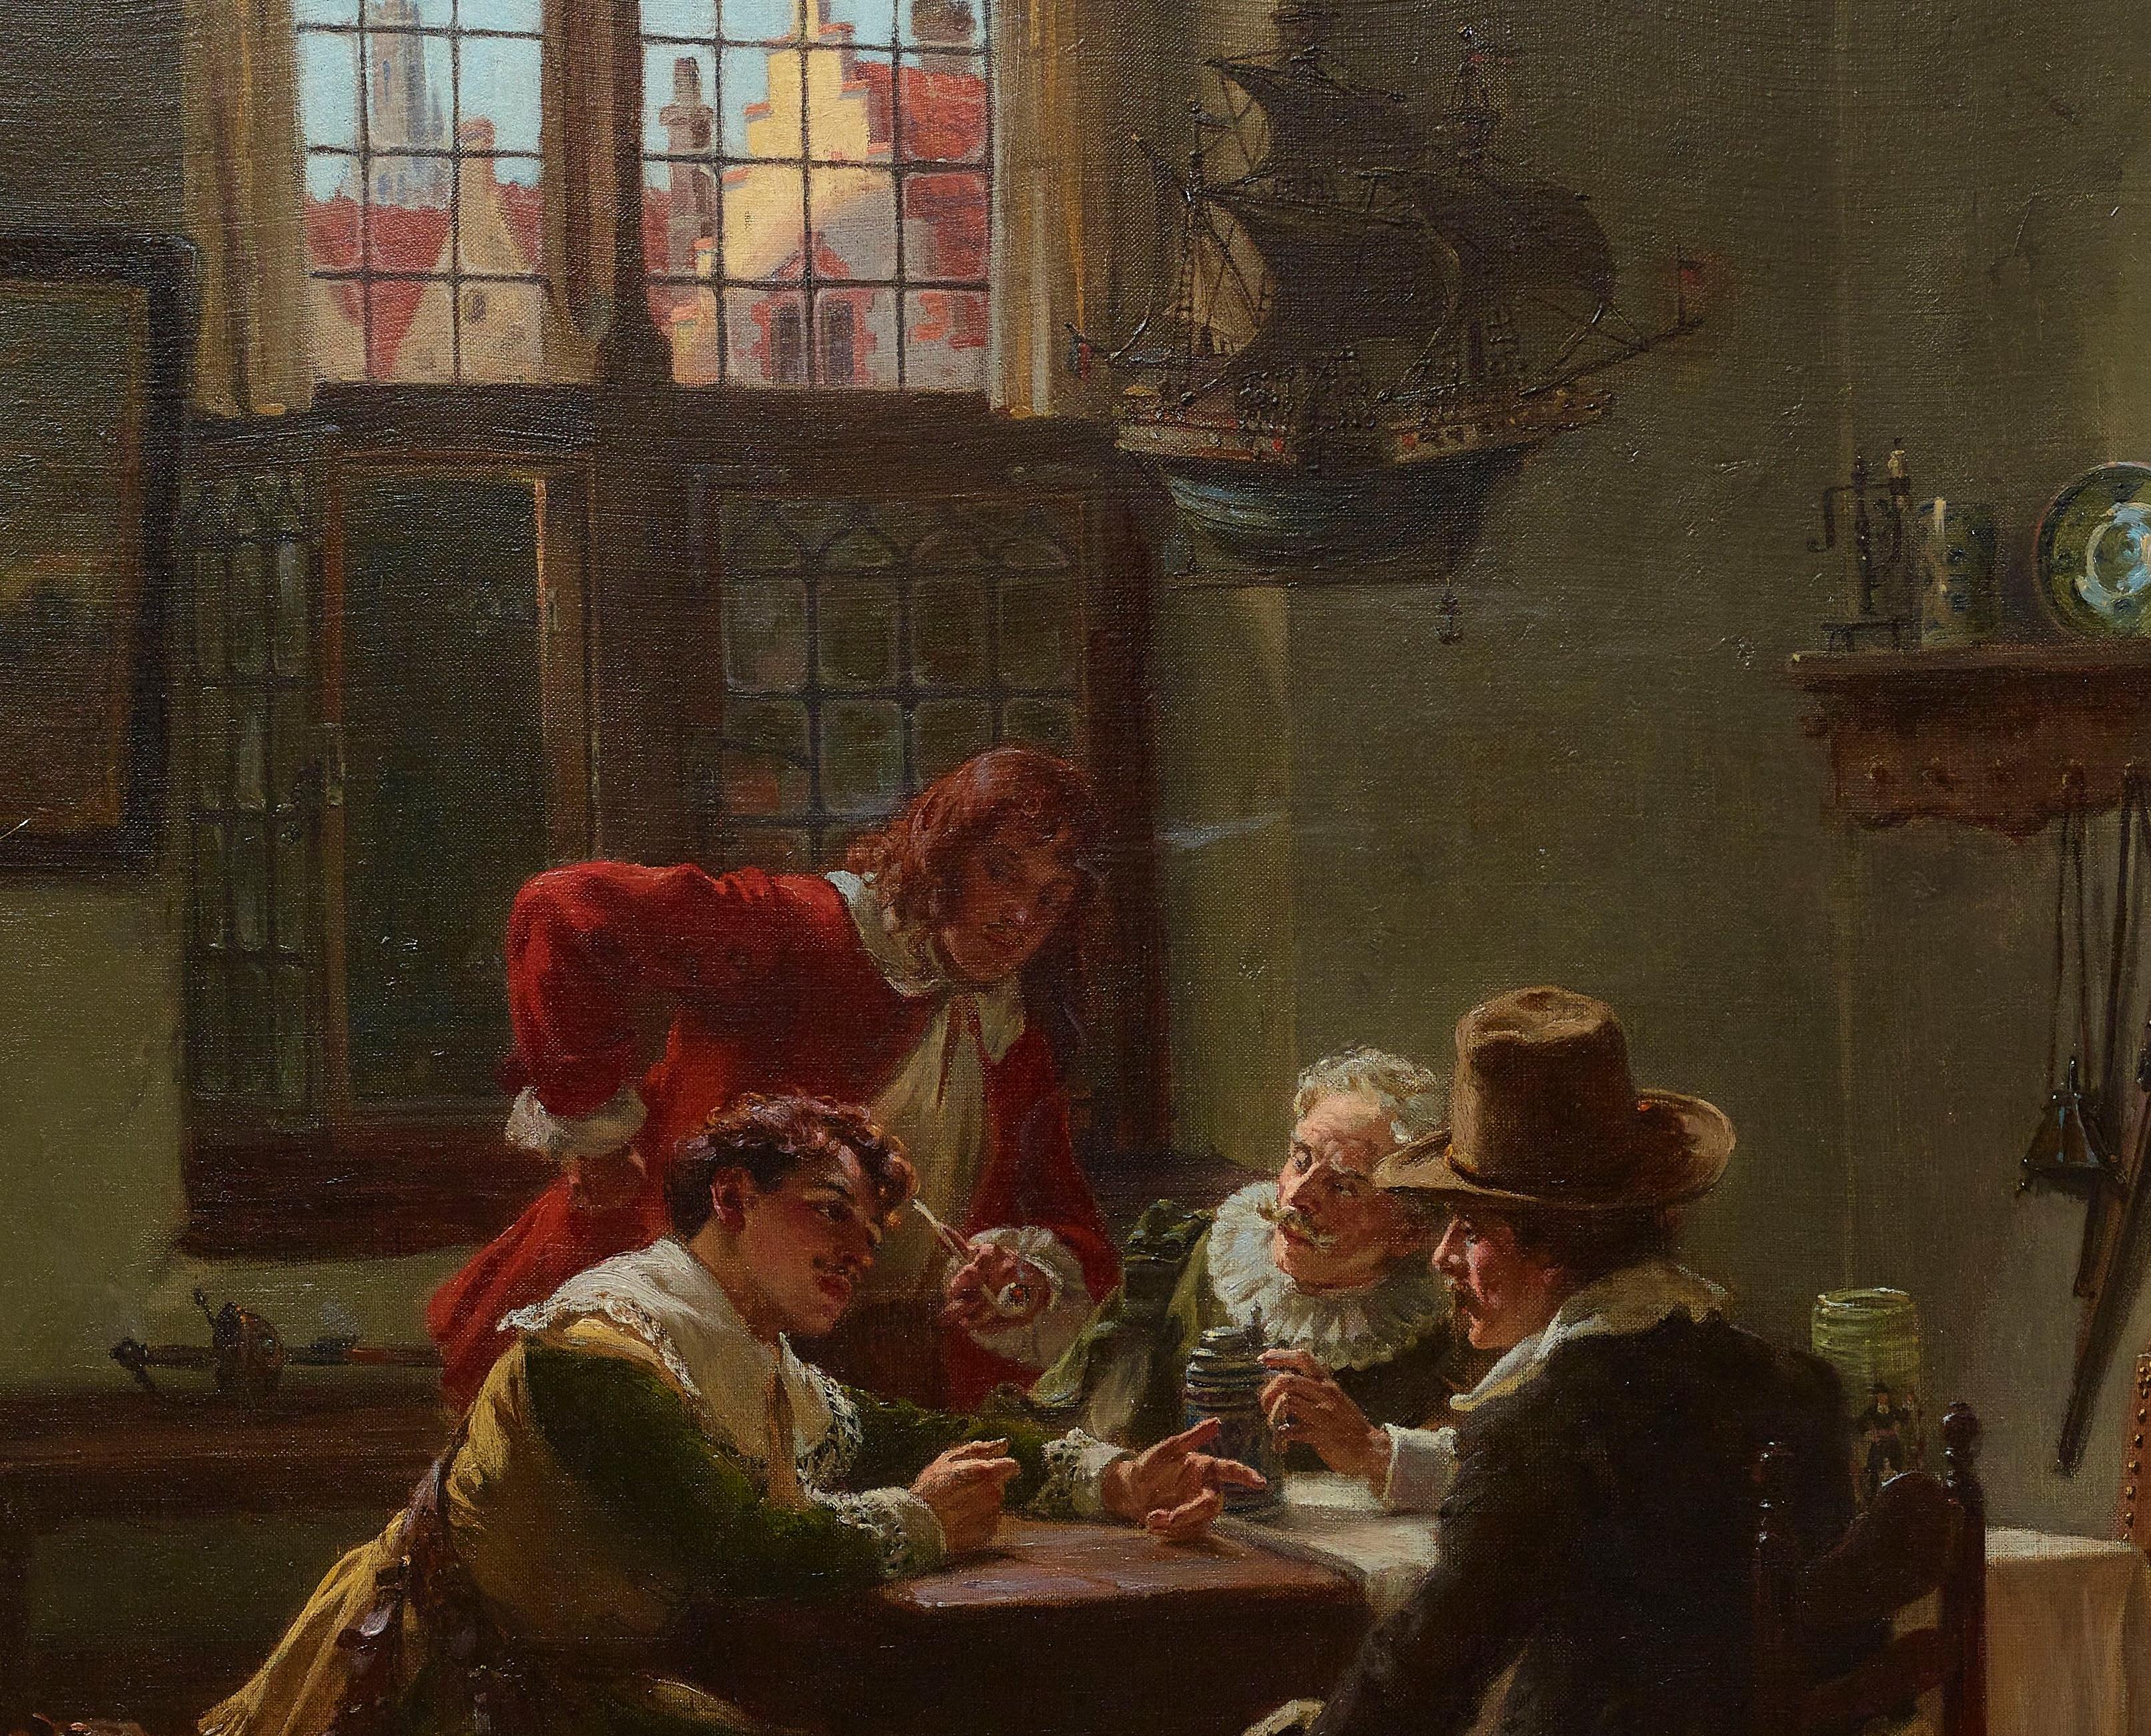 ‘Making the Next Move’ is a very typical example of Schroder’s work. The figures sitting around the table debating their ‘next move’ transports the viewer to the scene. You wonder what the topic of conversation is? Who are these finely dressed men?